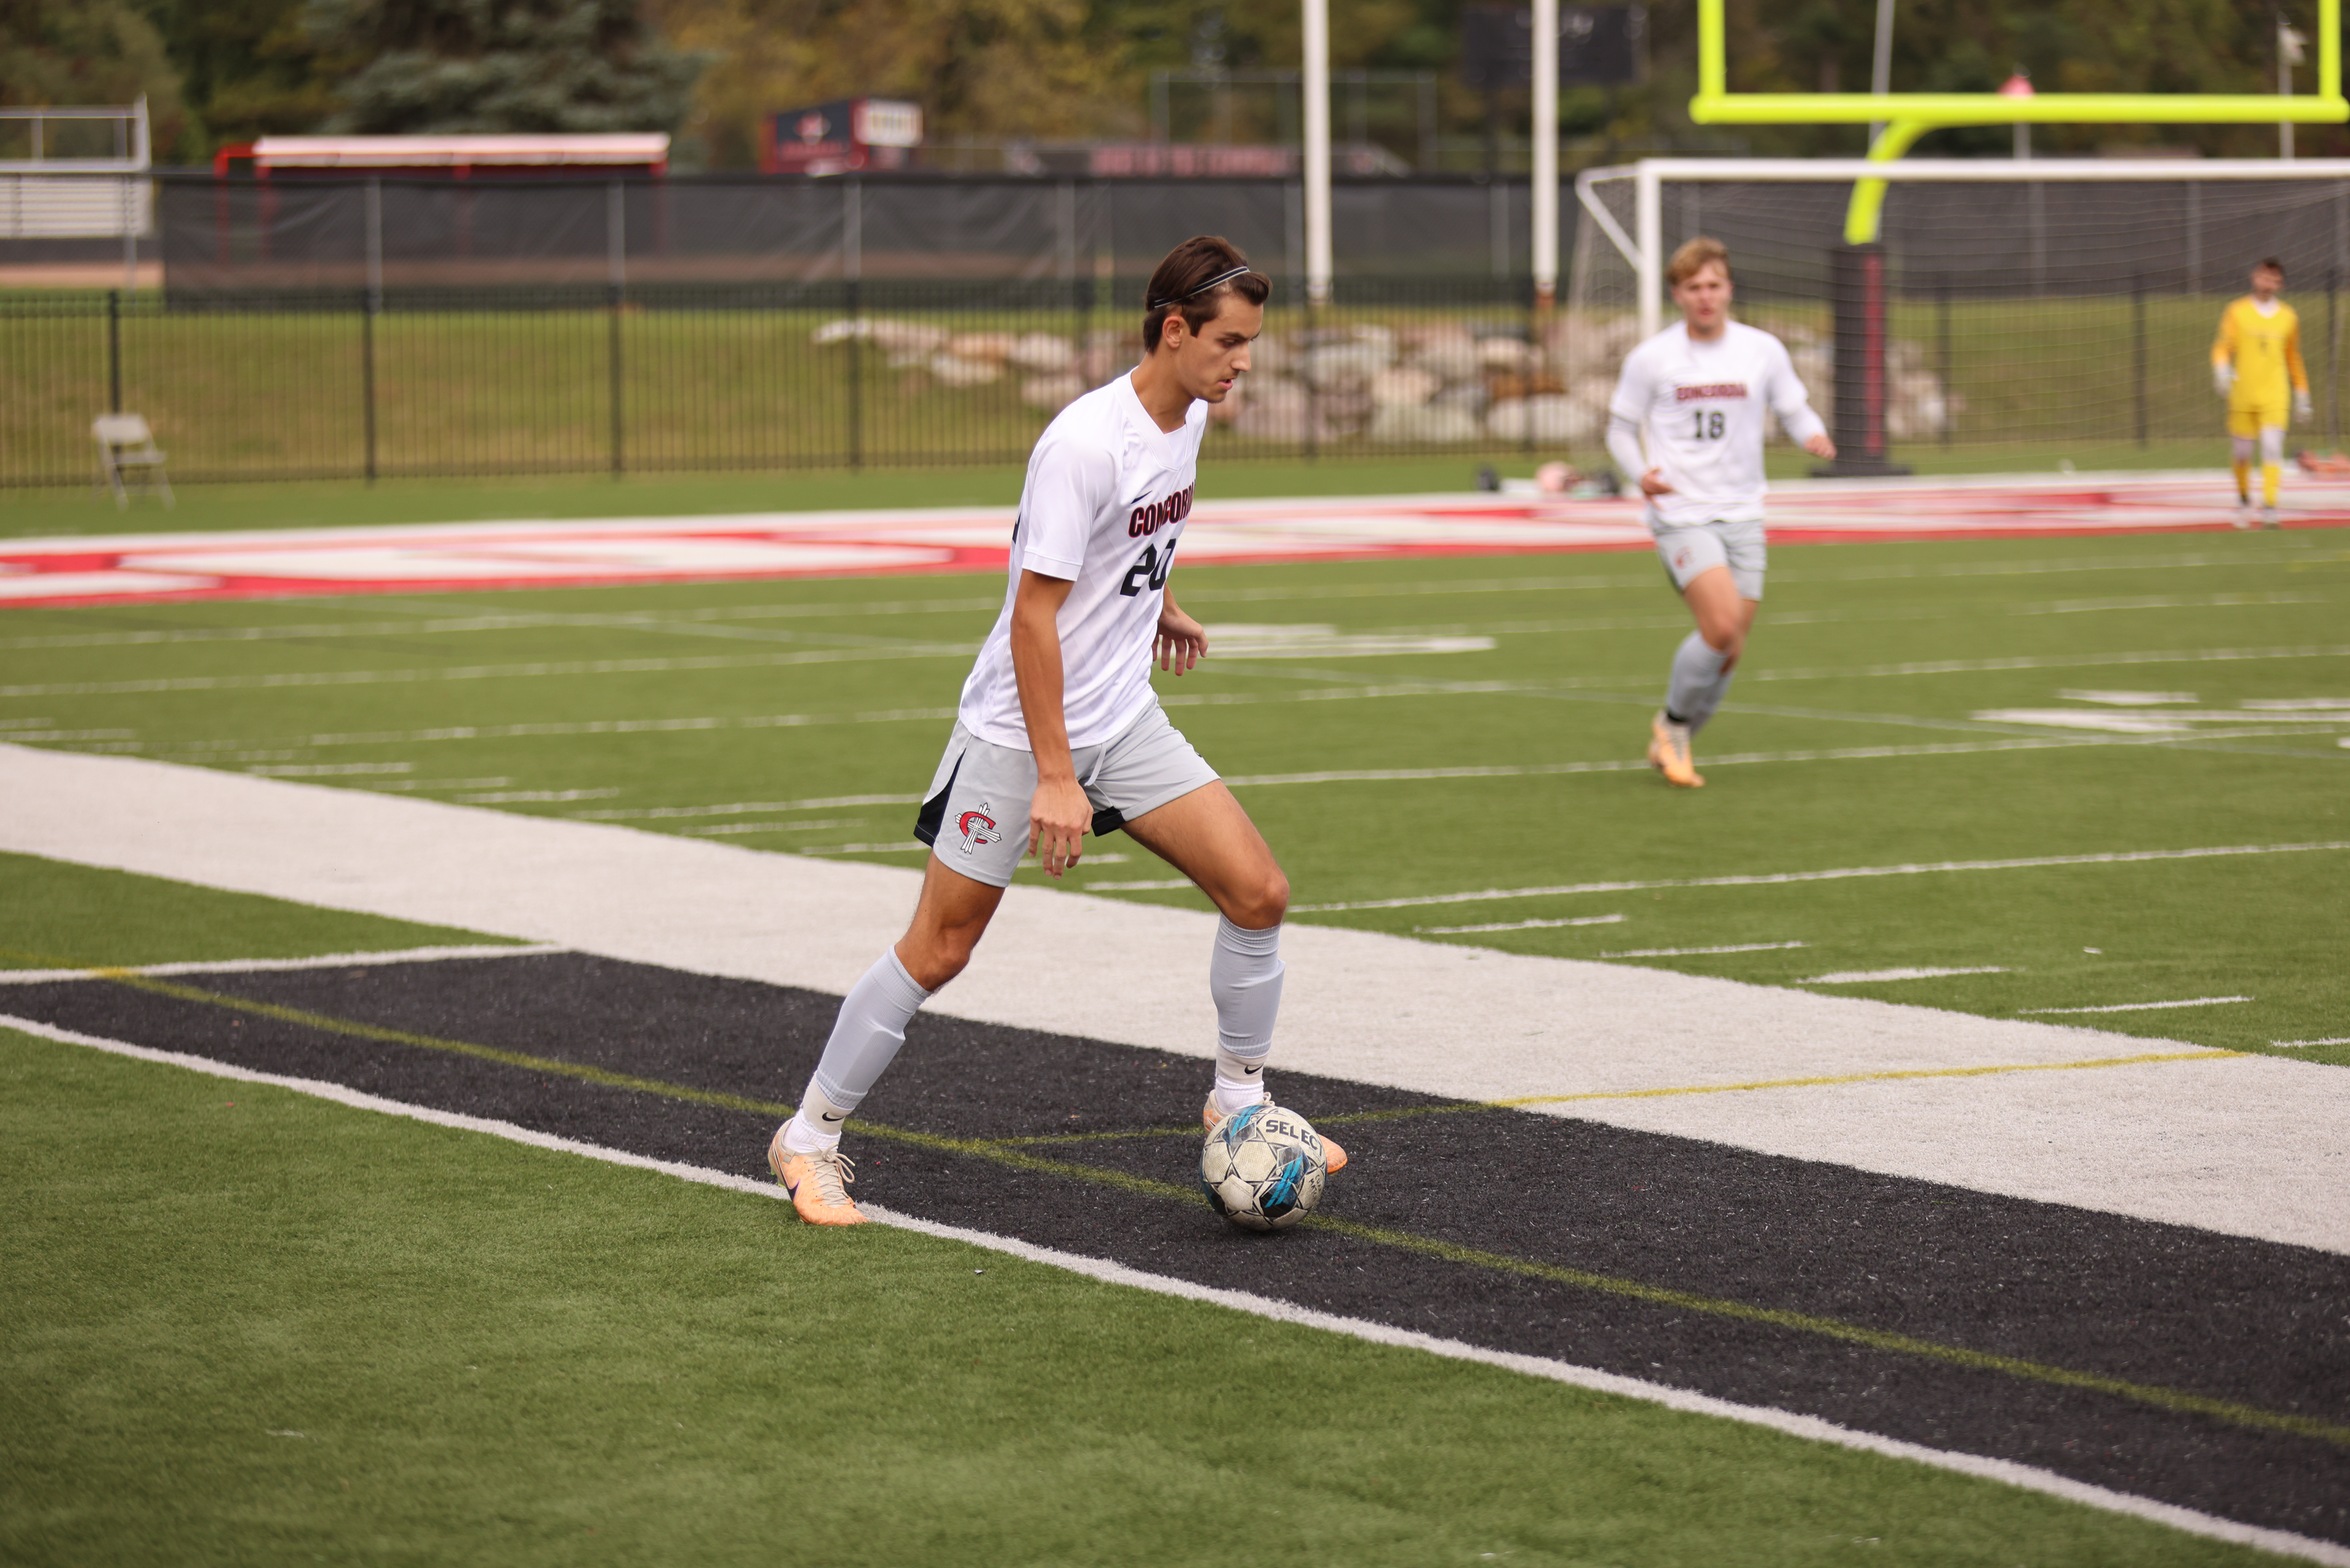 Men's Soccer draws 1-1 with Michigan-Dearborn at home